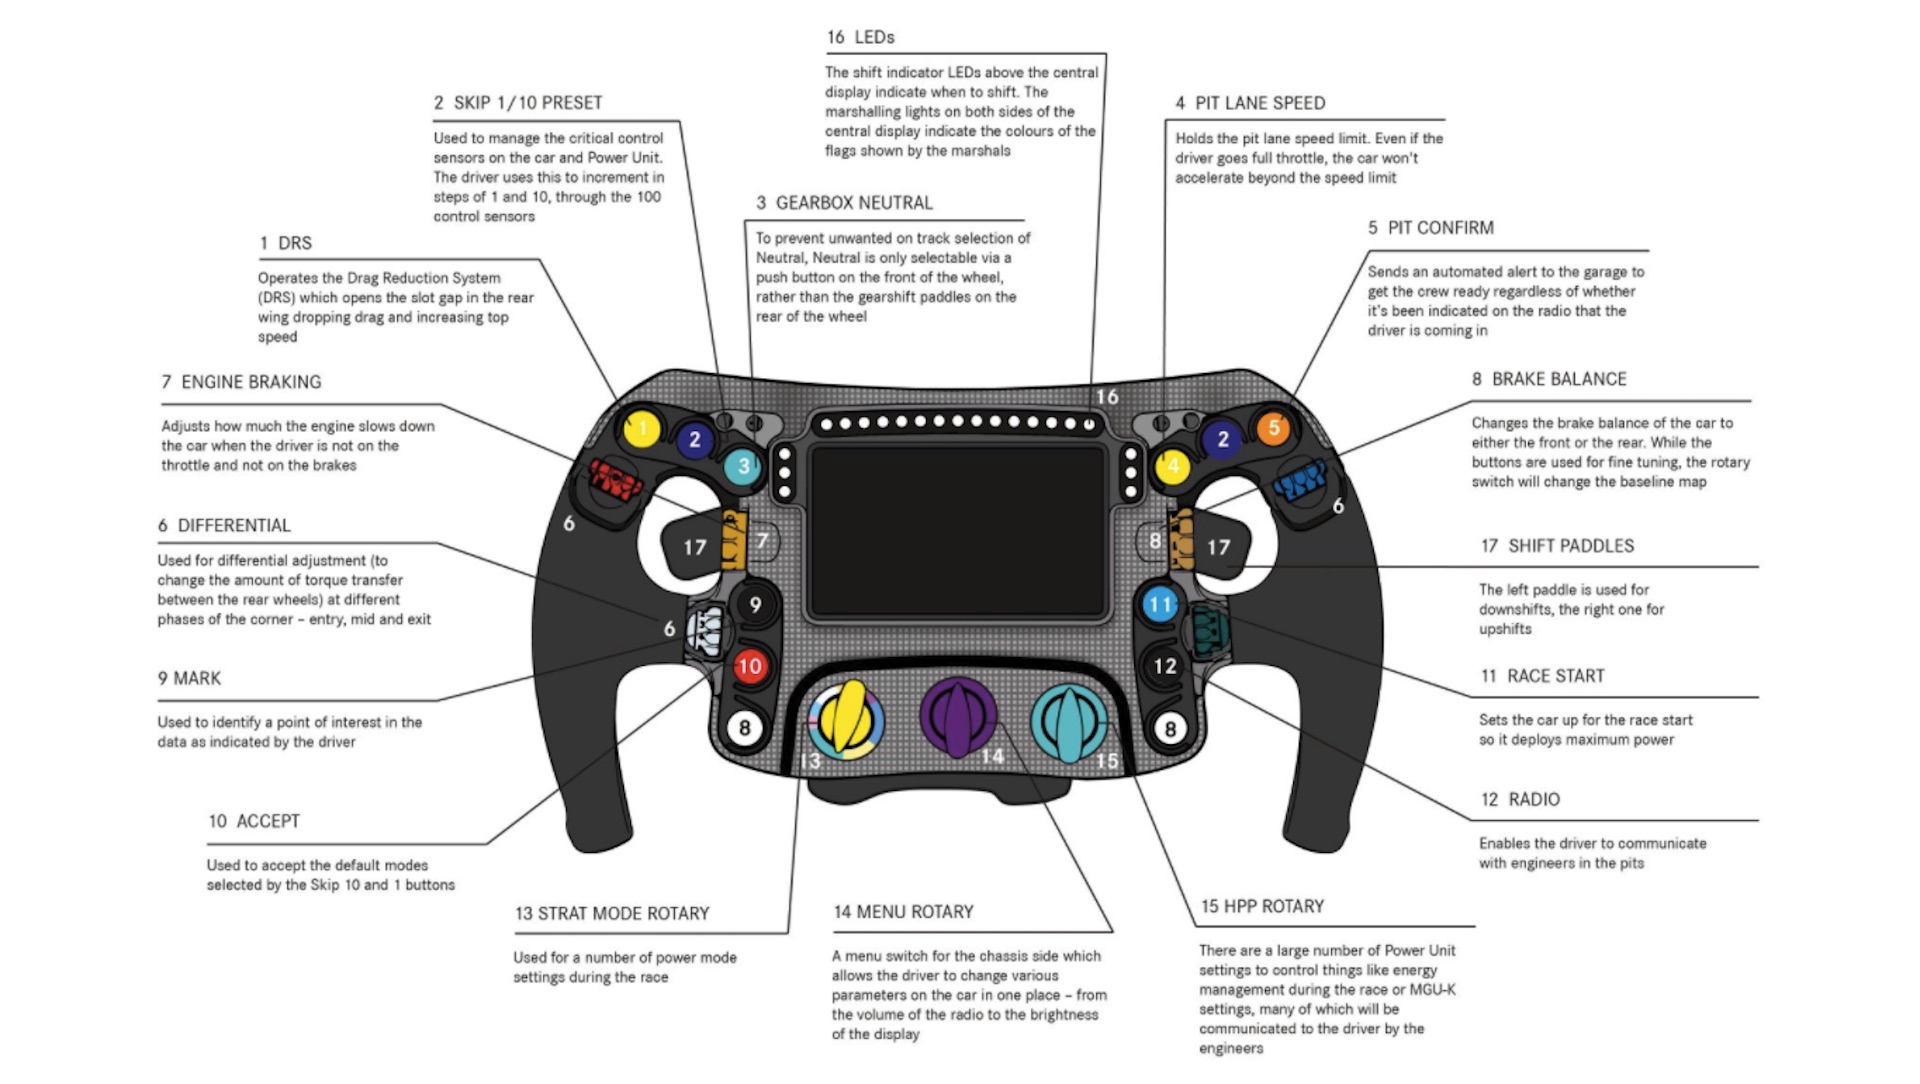 Here's what every button on an F1 steering wheel does